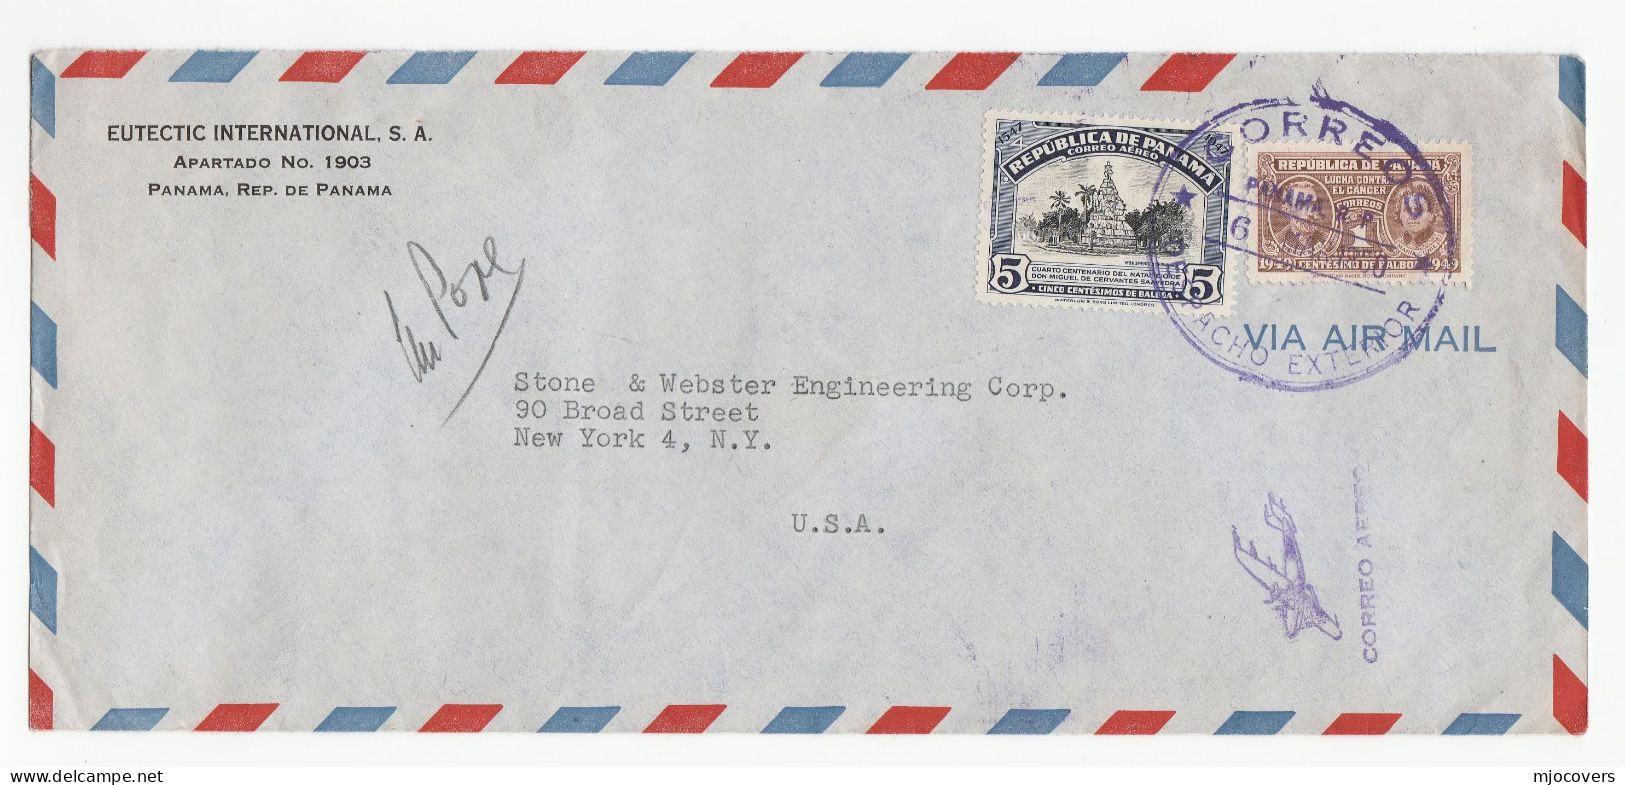 CANCER  - 1950 Panama COVER  Marie CURIE Anti Cancer Stamps Air Mail To USA Chemistry Health Medicine - Disease